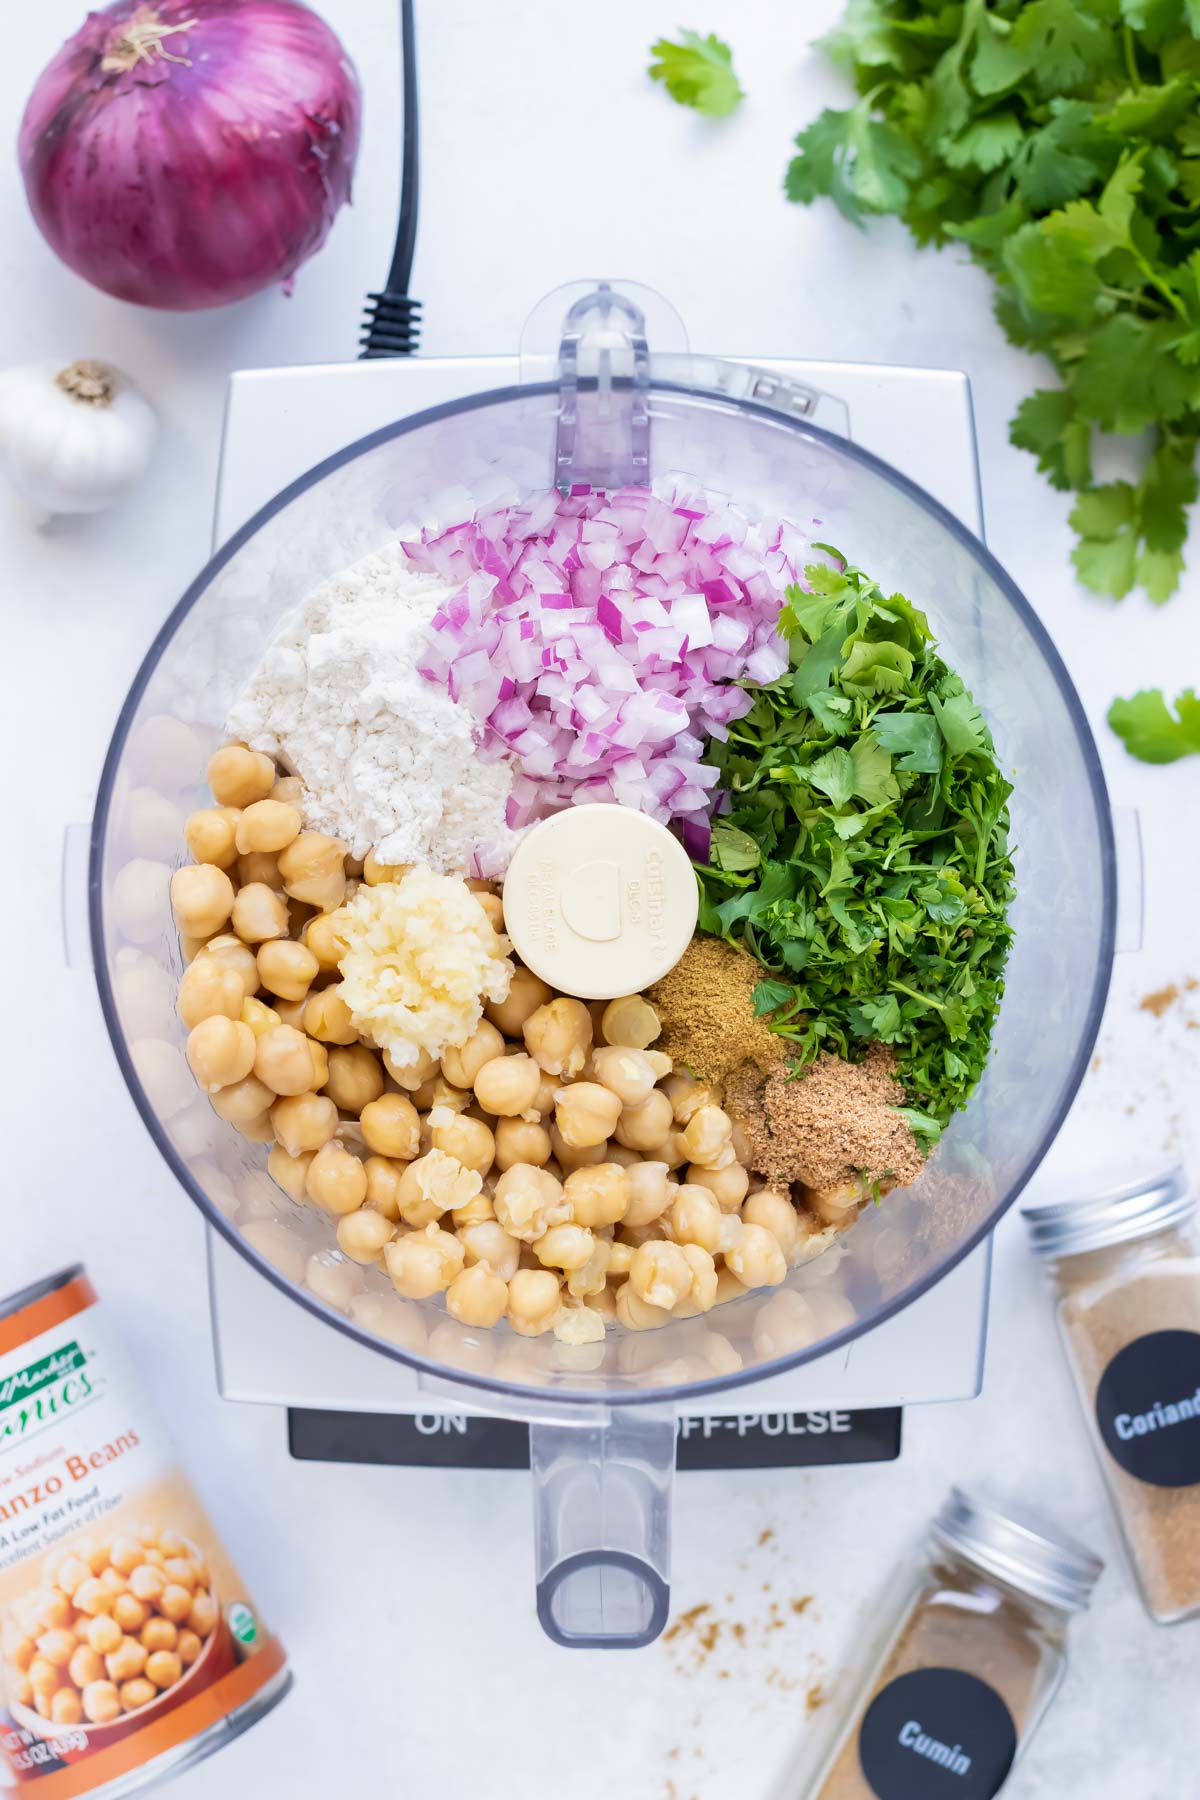 Add all ingredients into a food processor in this Greek dish.